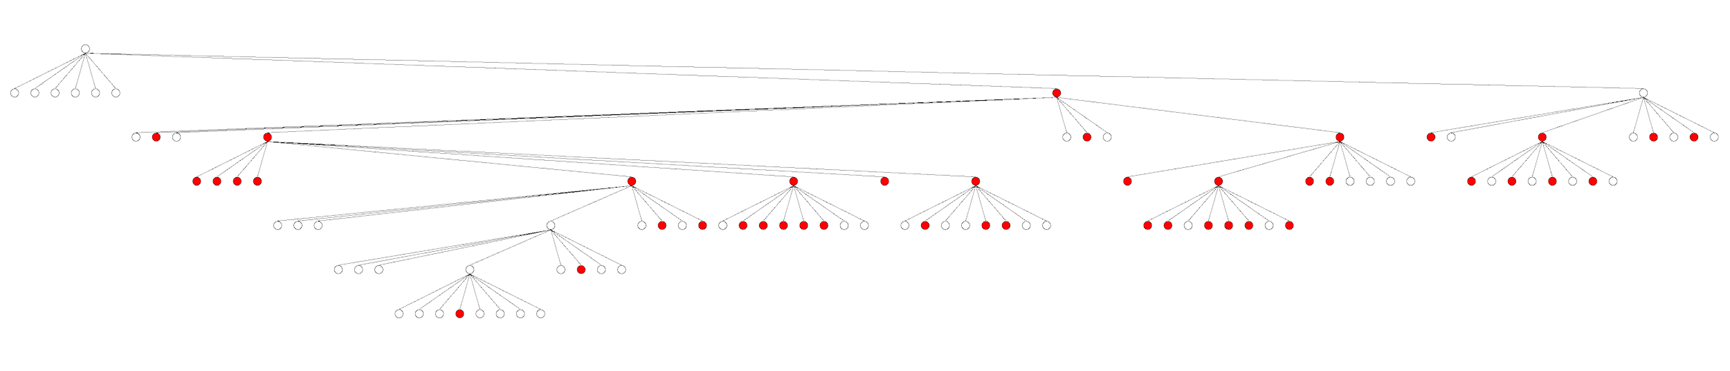 Node structure of an octree visualized by the data visualizer